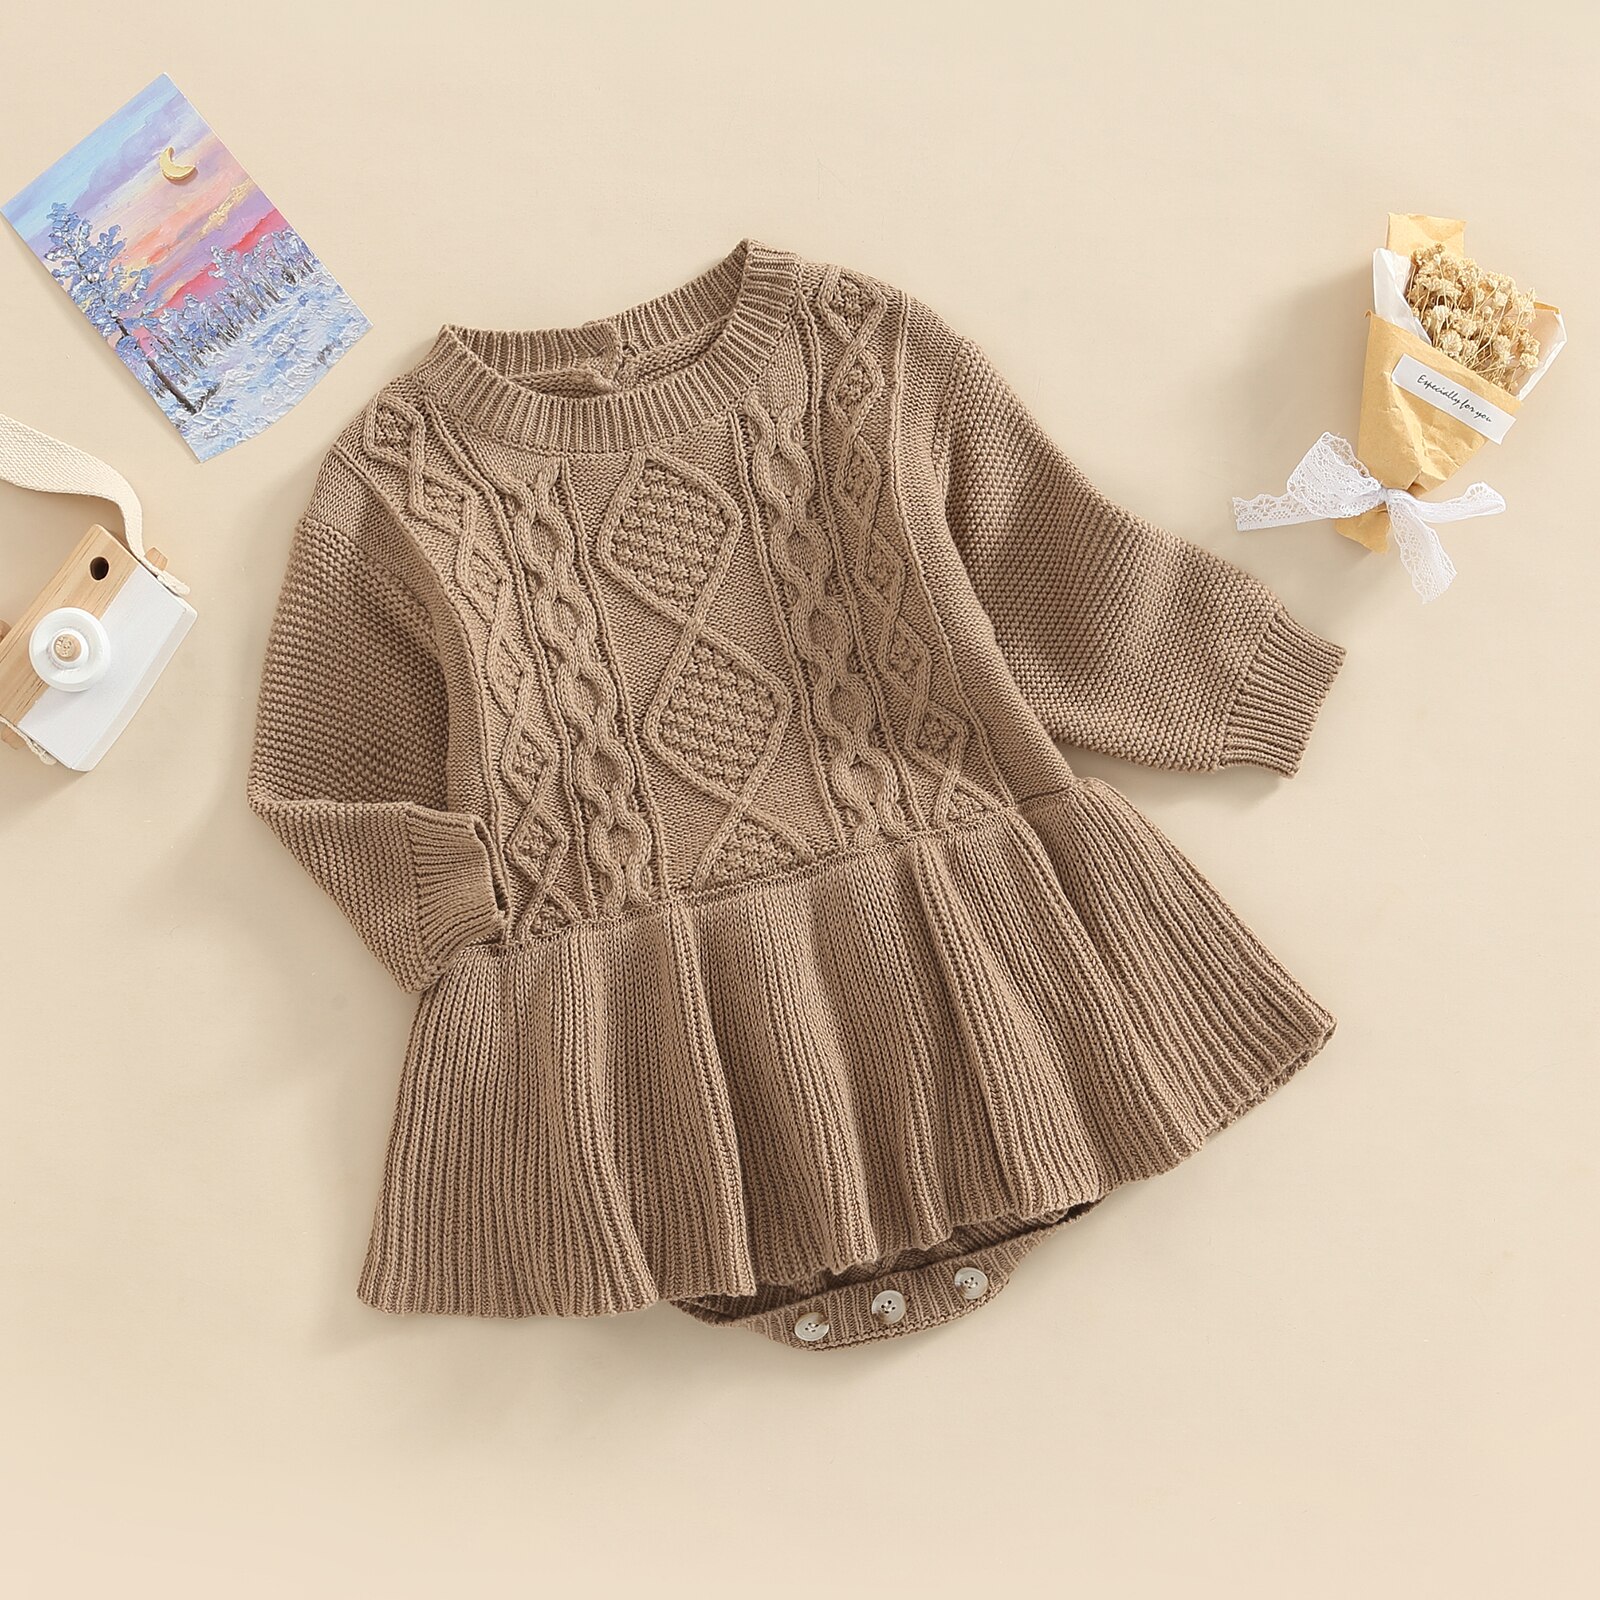 FOCUSNORM-0-24M-Autumn-Winter-Knitted-Sweater-Romper-Dress-For-Baby-Girls-Boys-Long-Sleeve-Solid-1